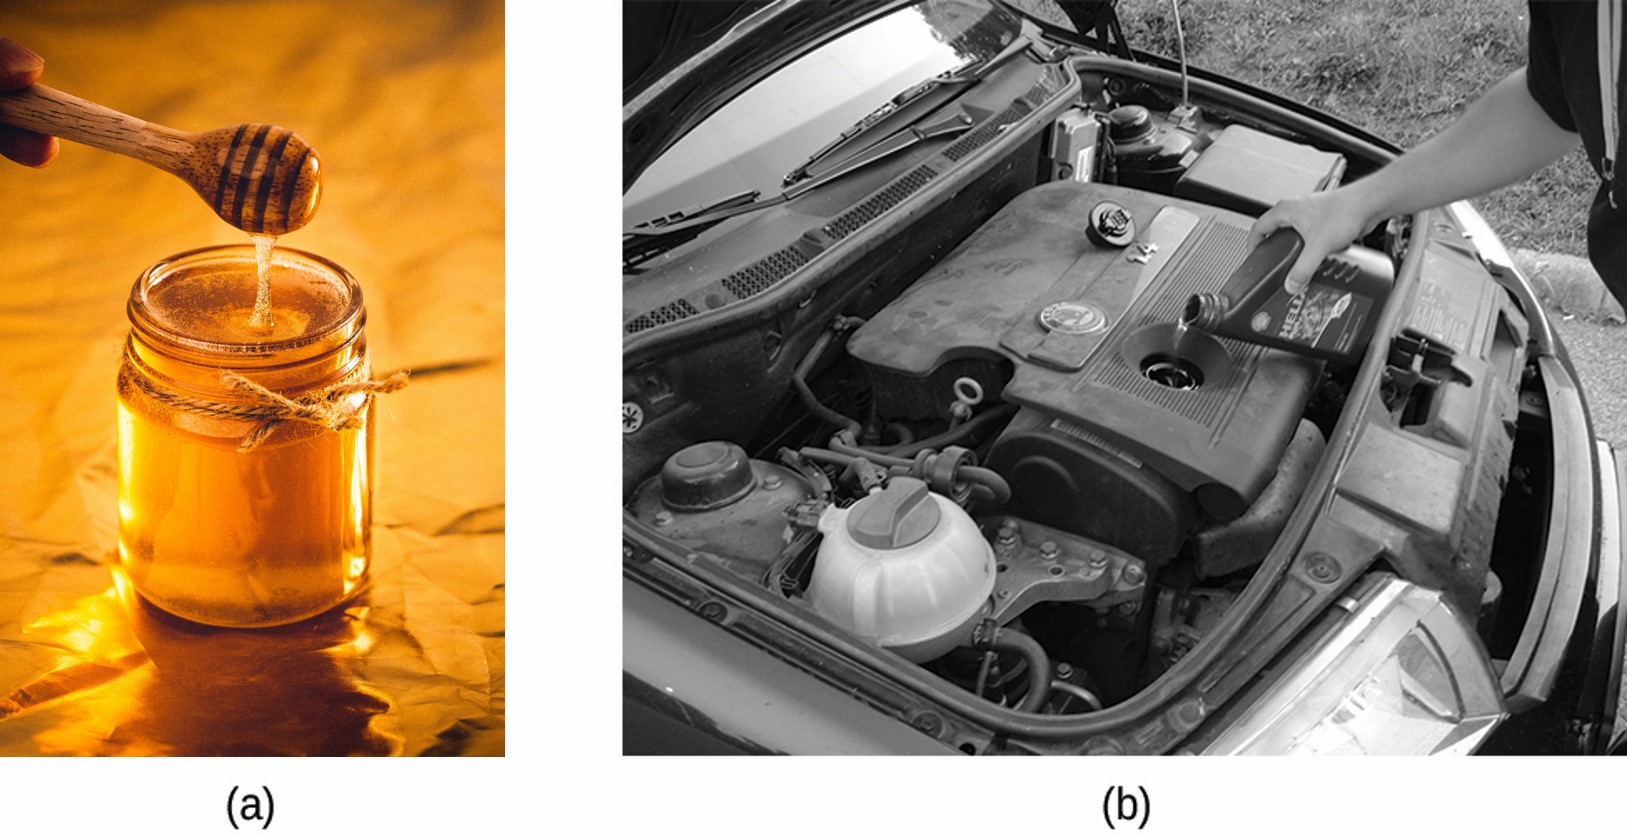 A jar of honey displaying its high viscosity and motor oil being poured into the engine of a car are pictured.